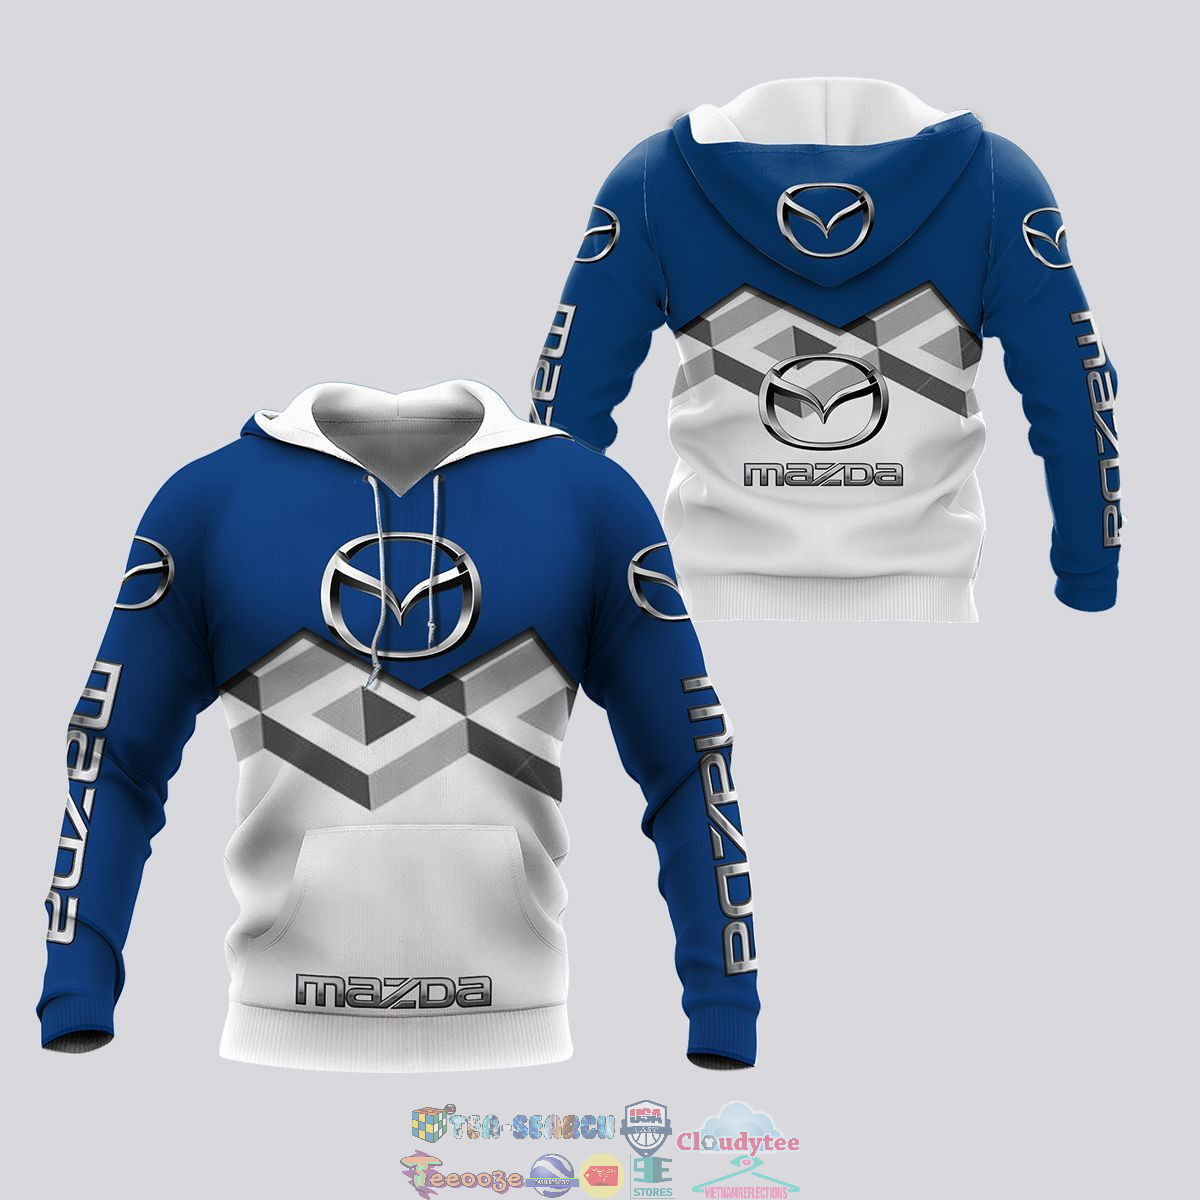 Mazda ver 10 3D hoodie and t-shirt